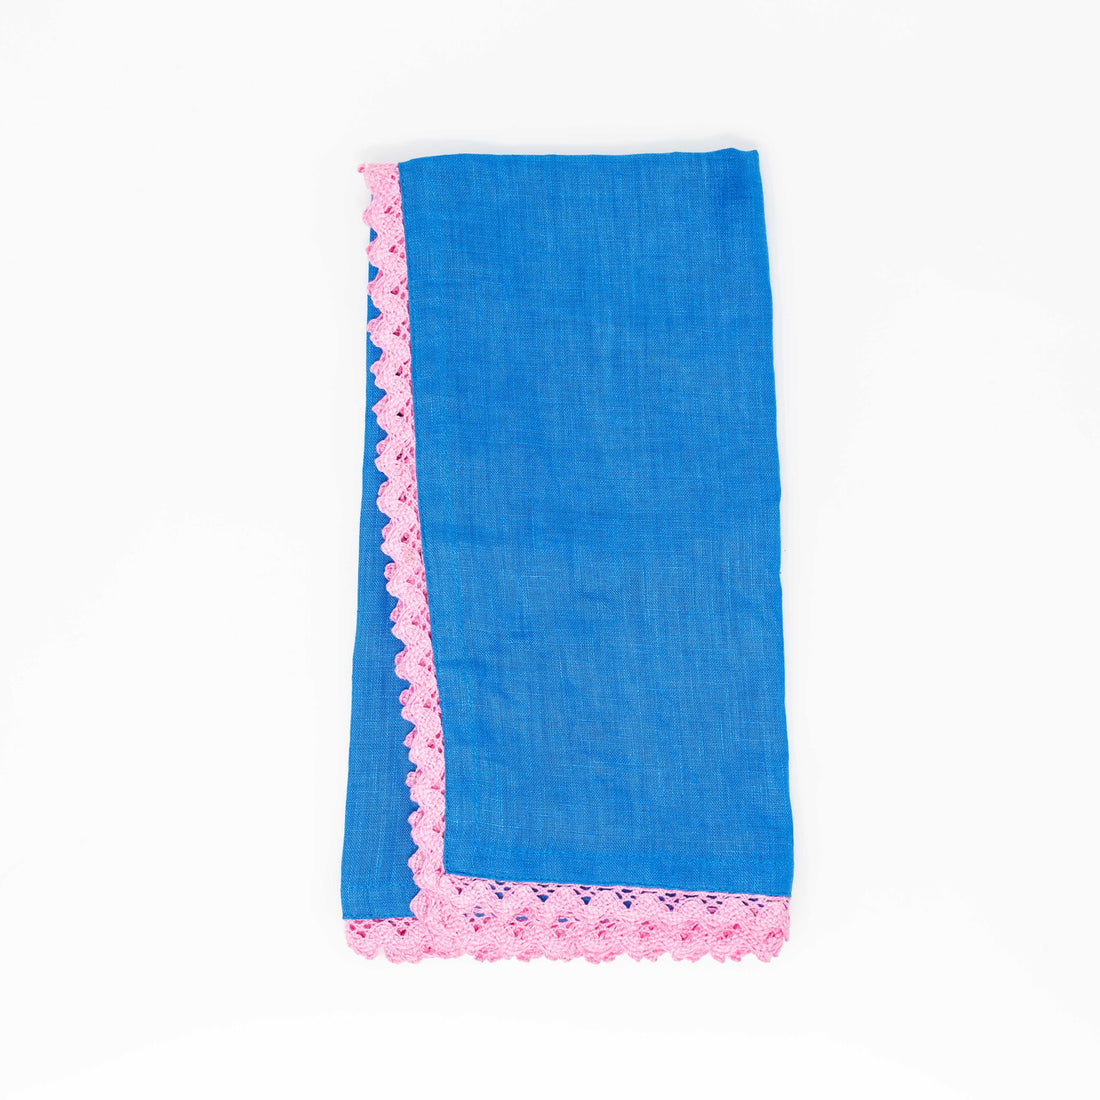 THE PINK LACED NAPKIN - SET